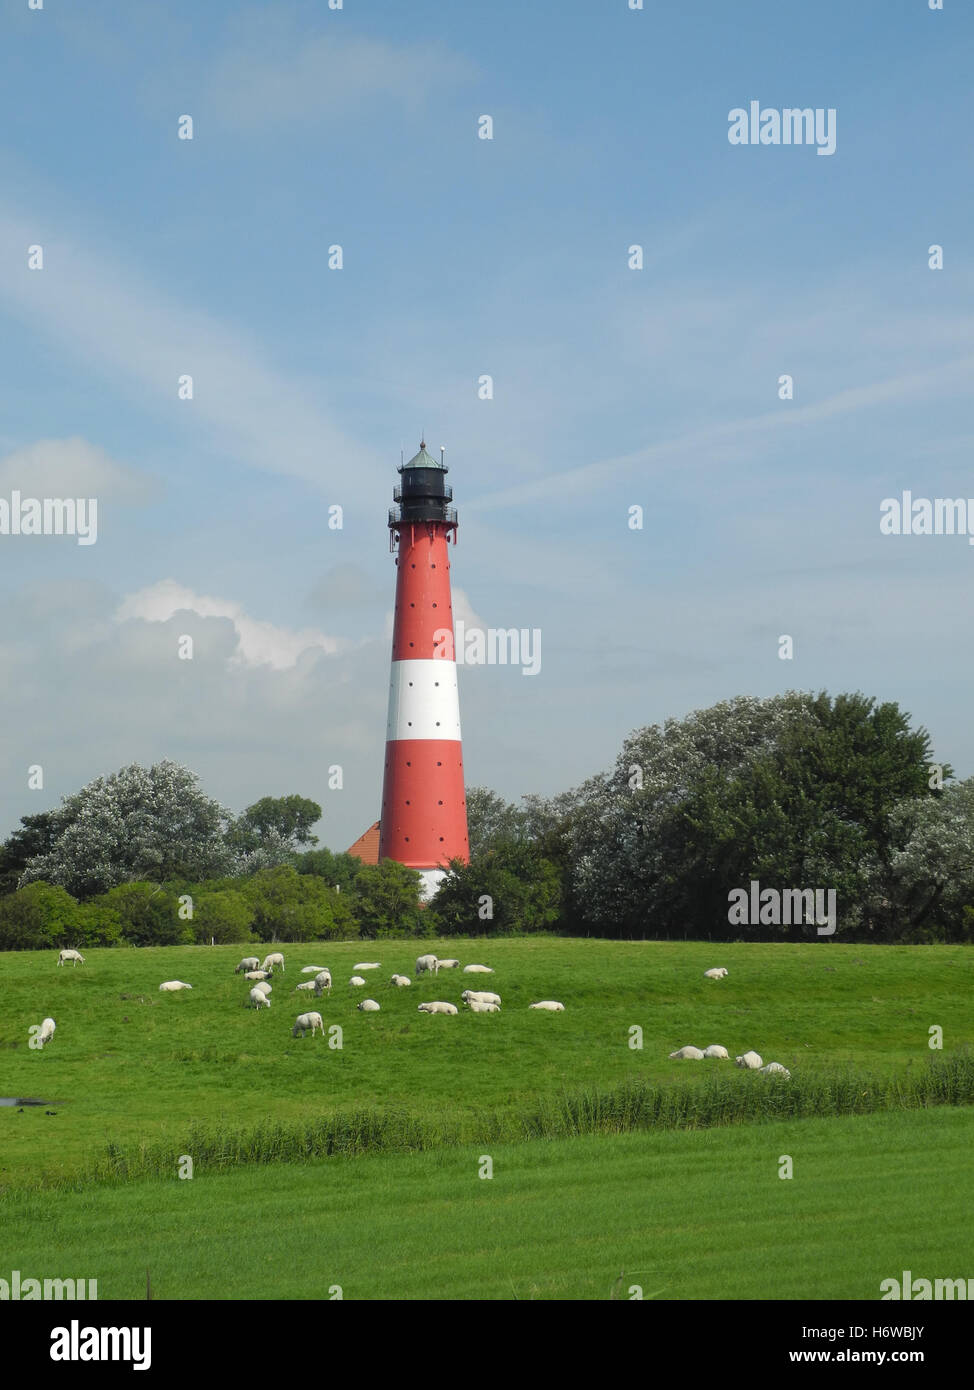 Pellworm Island High Resolution Stock Photography and Images - Alamy